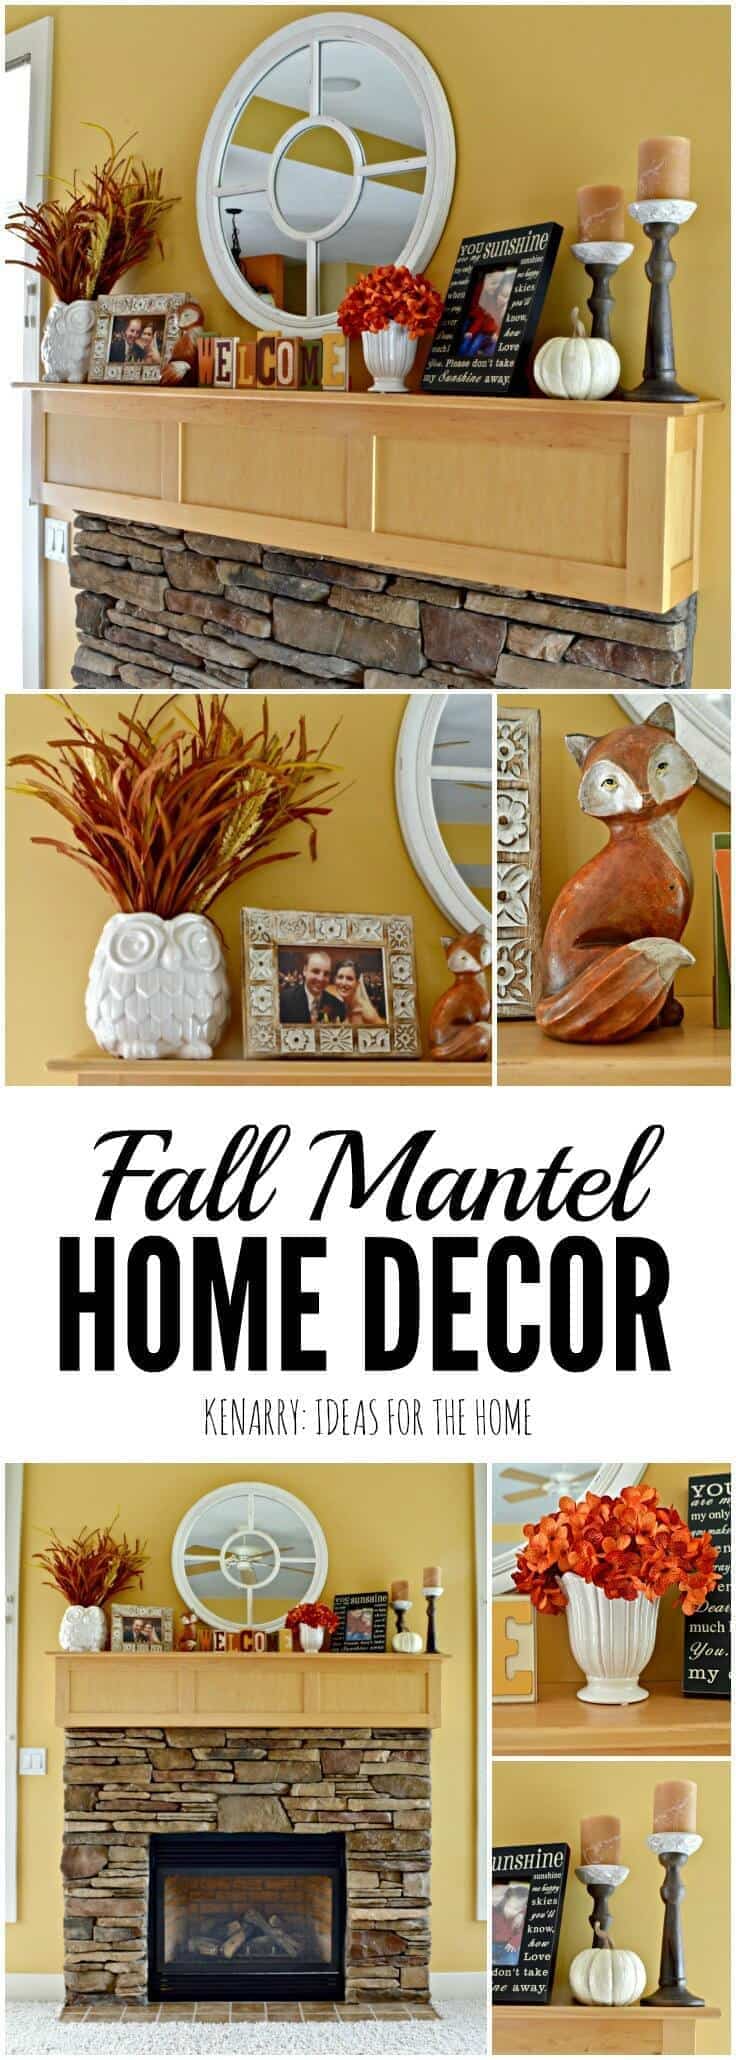 Love these fall mantel decor ideas to update a fireplace for autumn with pumpkin orange and harvest yellow accents! These easy ideas will have your living room ready for Halloween, Thanksgiving and all the fun events of the season.